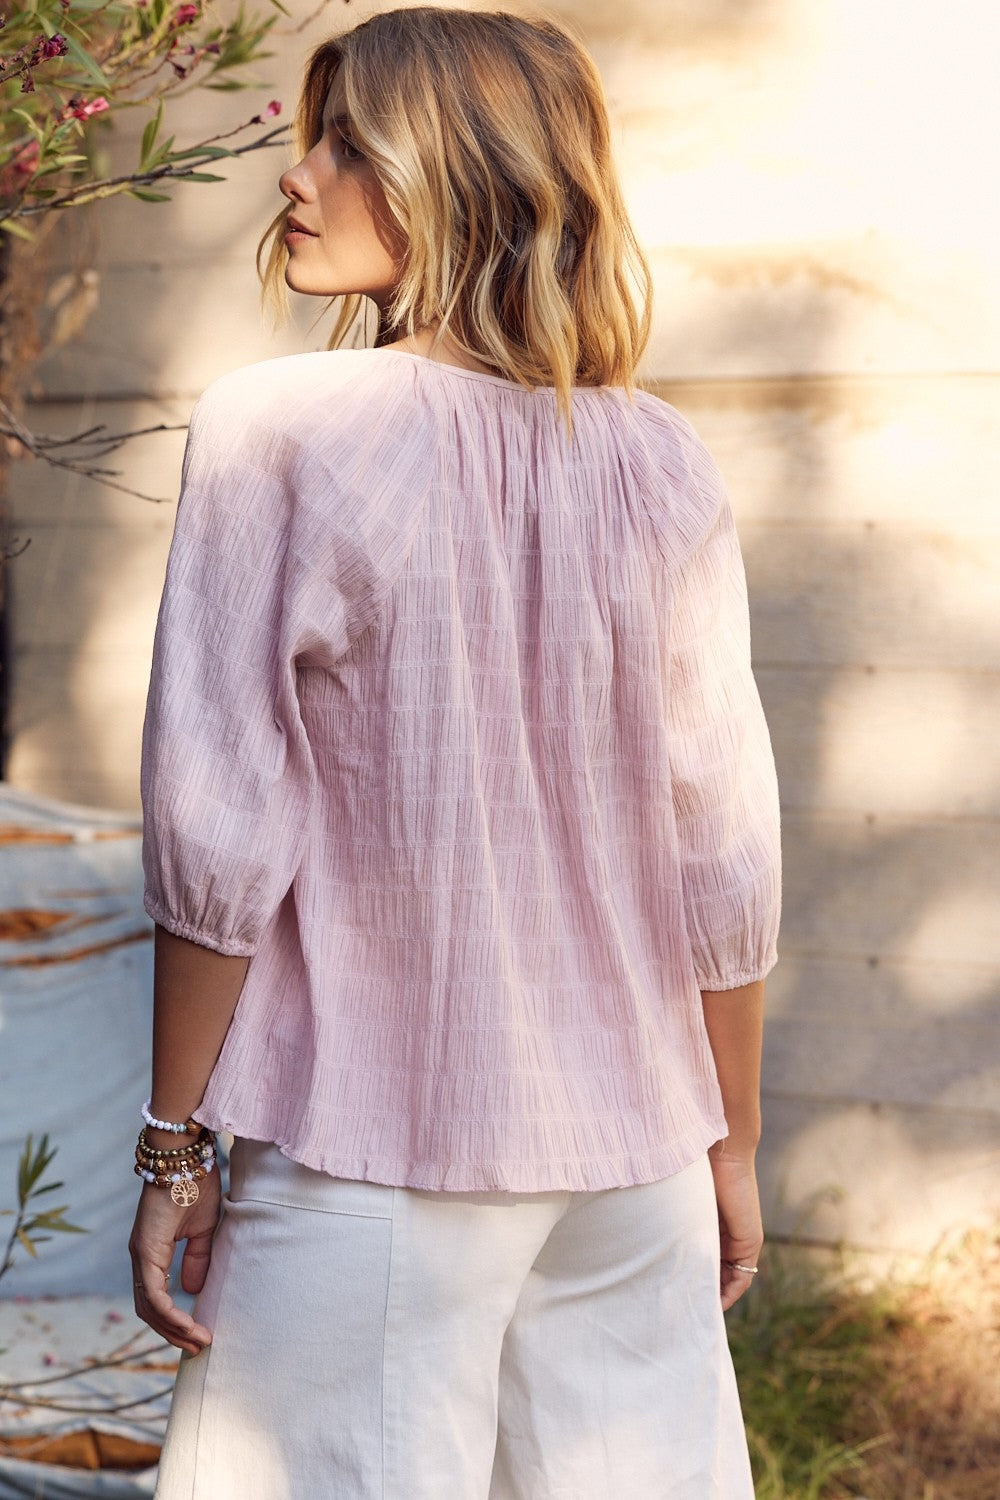 In February Textured Tie Neck Blouse